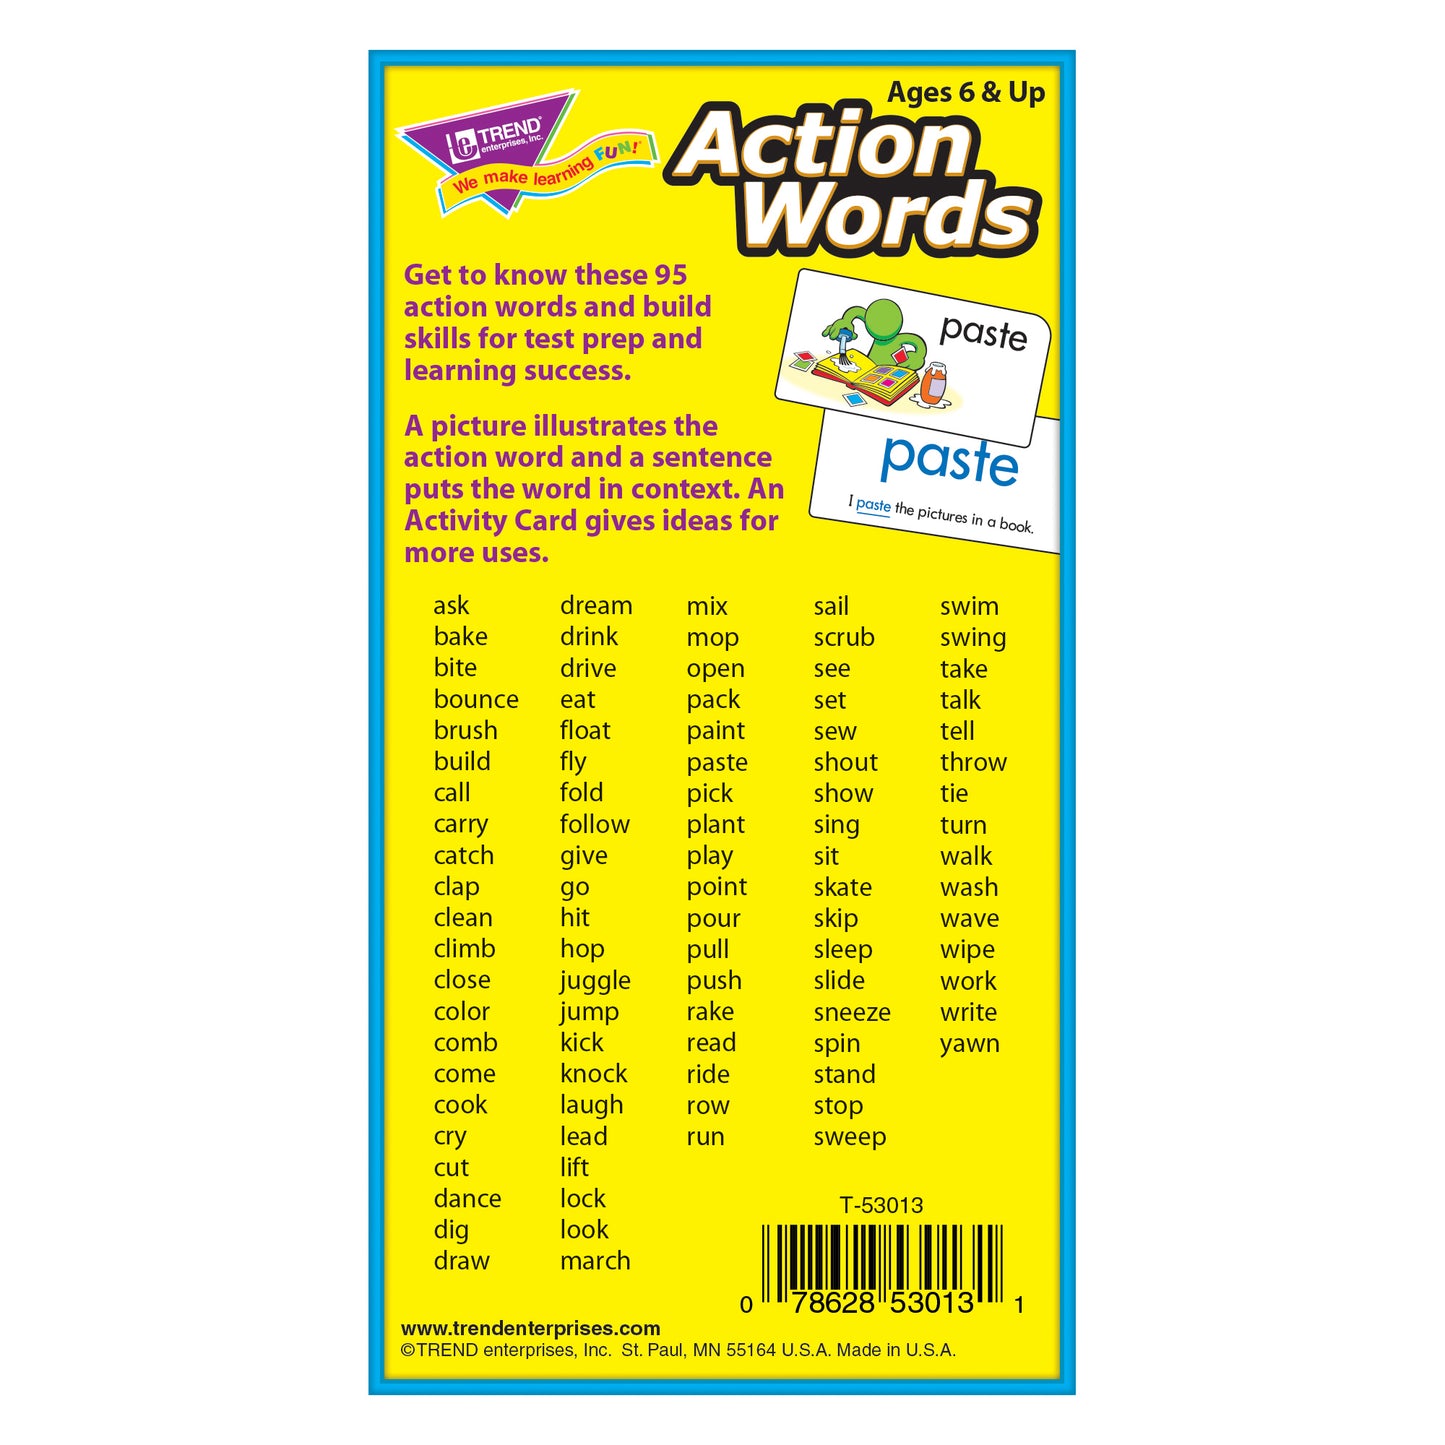 Action Words Skill Drill Flash Cards, 3 Packs